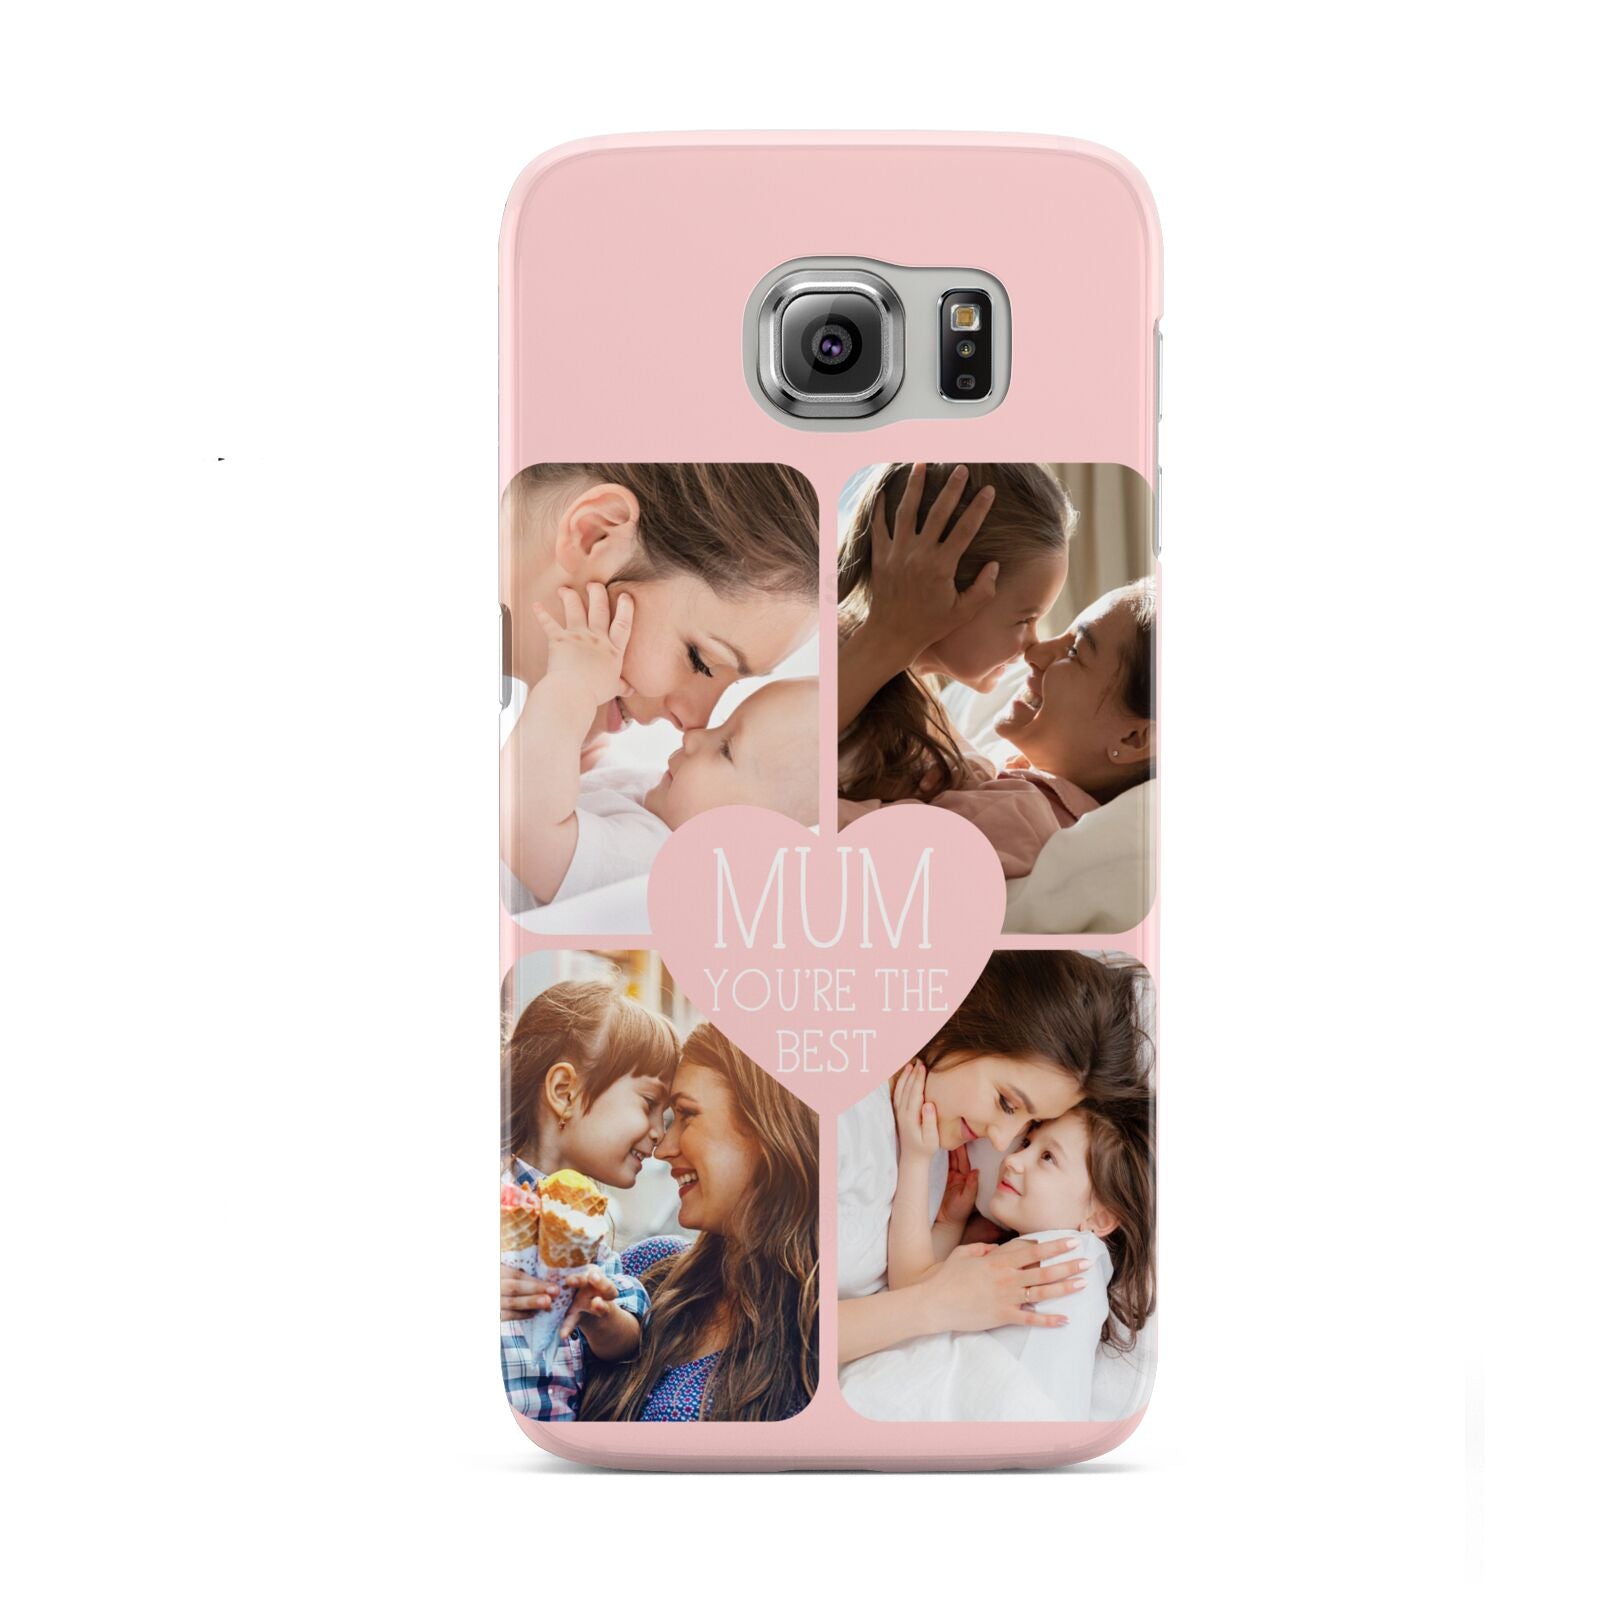 Mothers Day Four Photo Upload Samsung Galaxy S6 Case